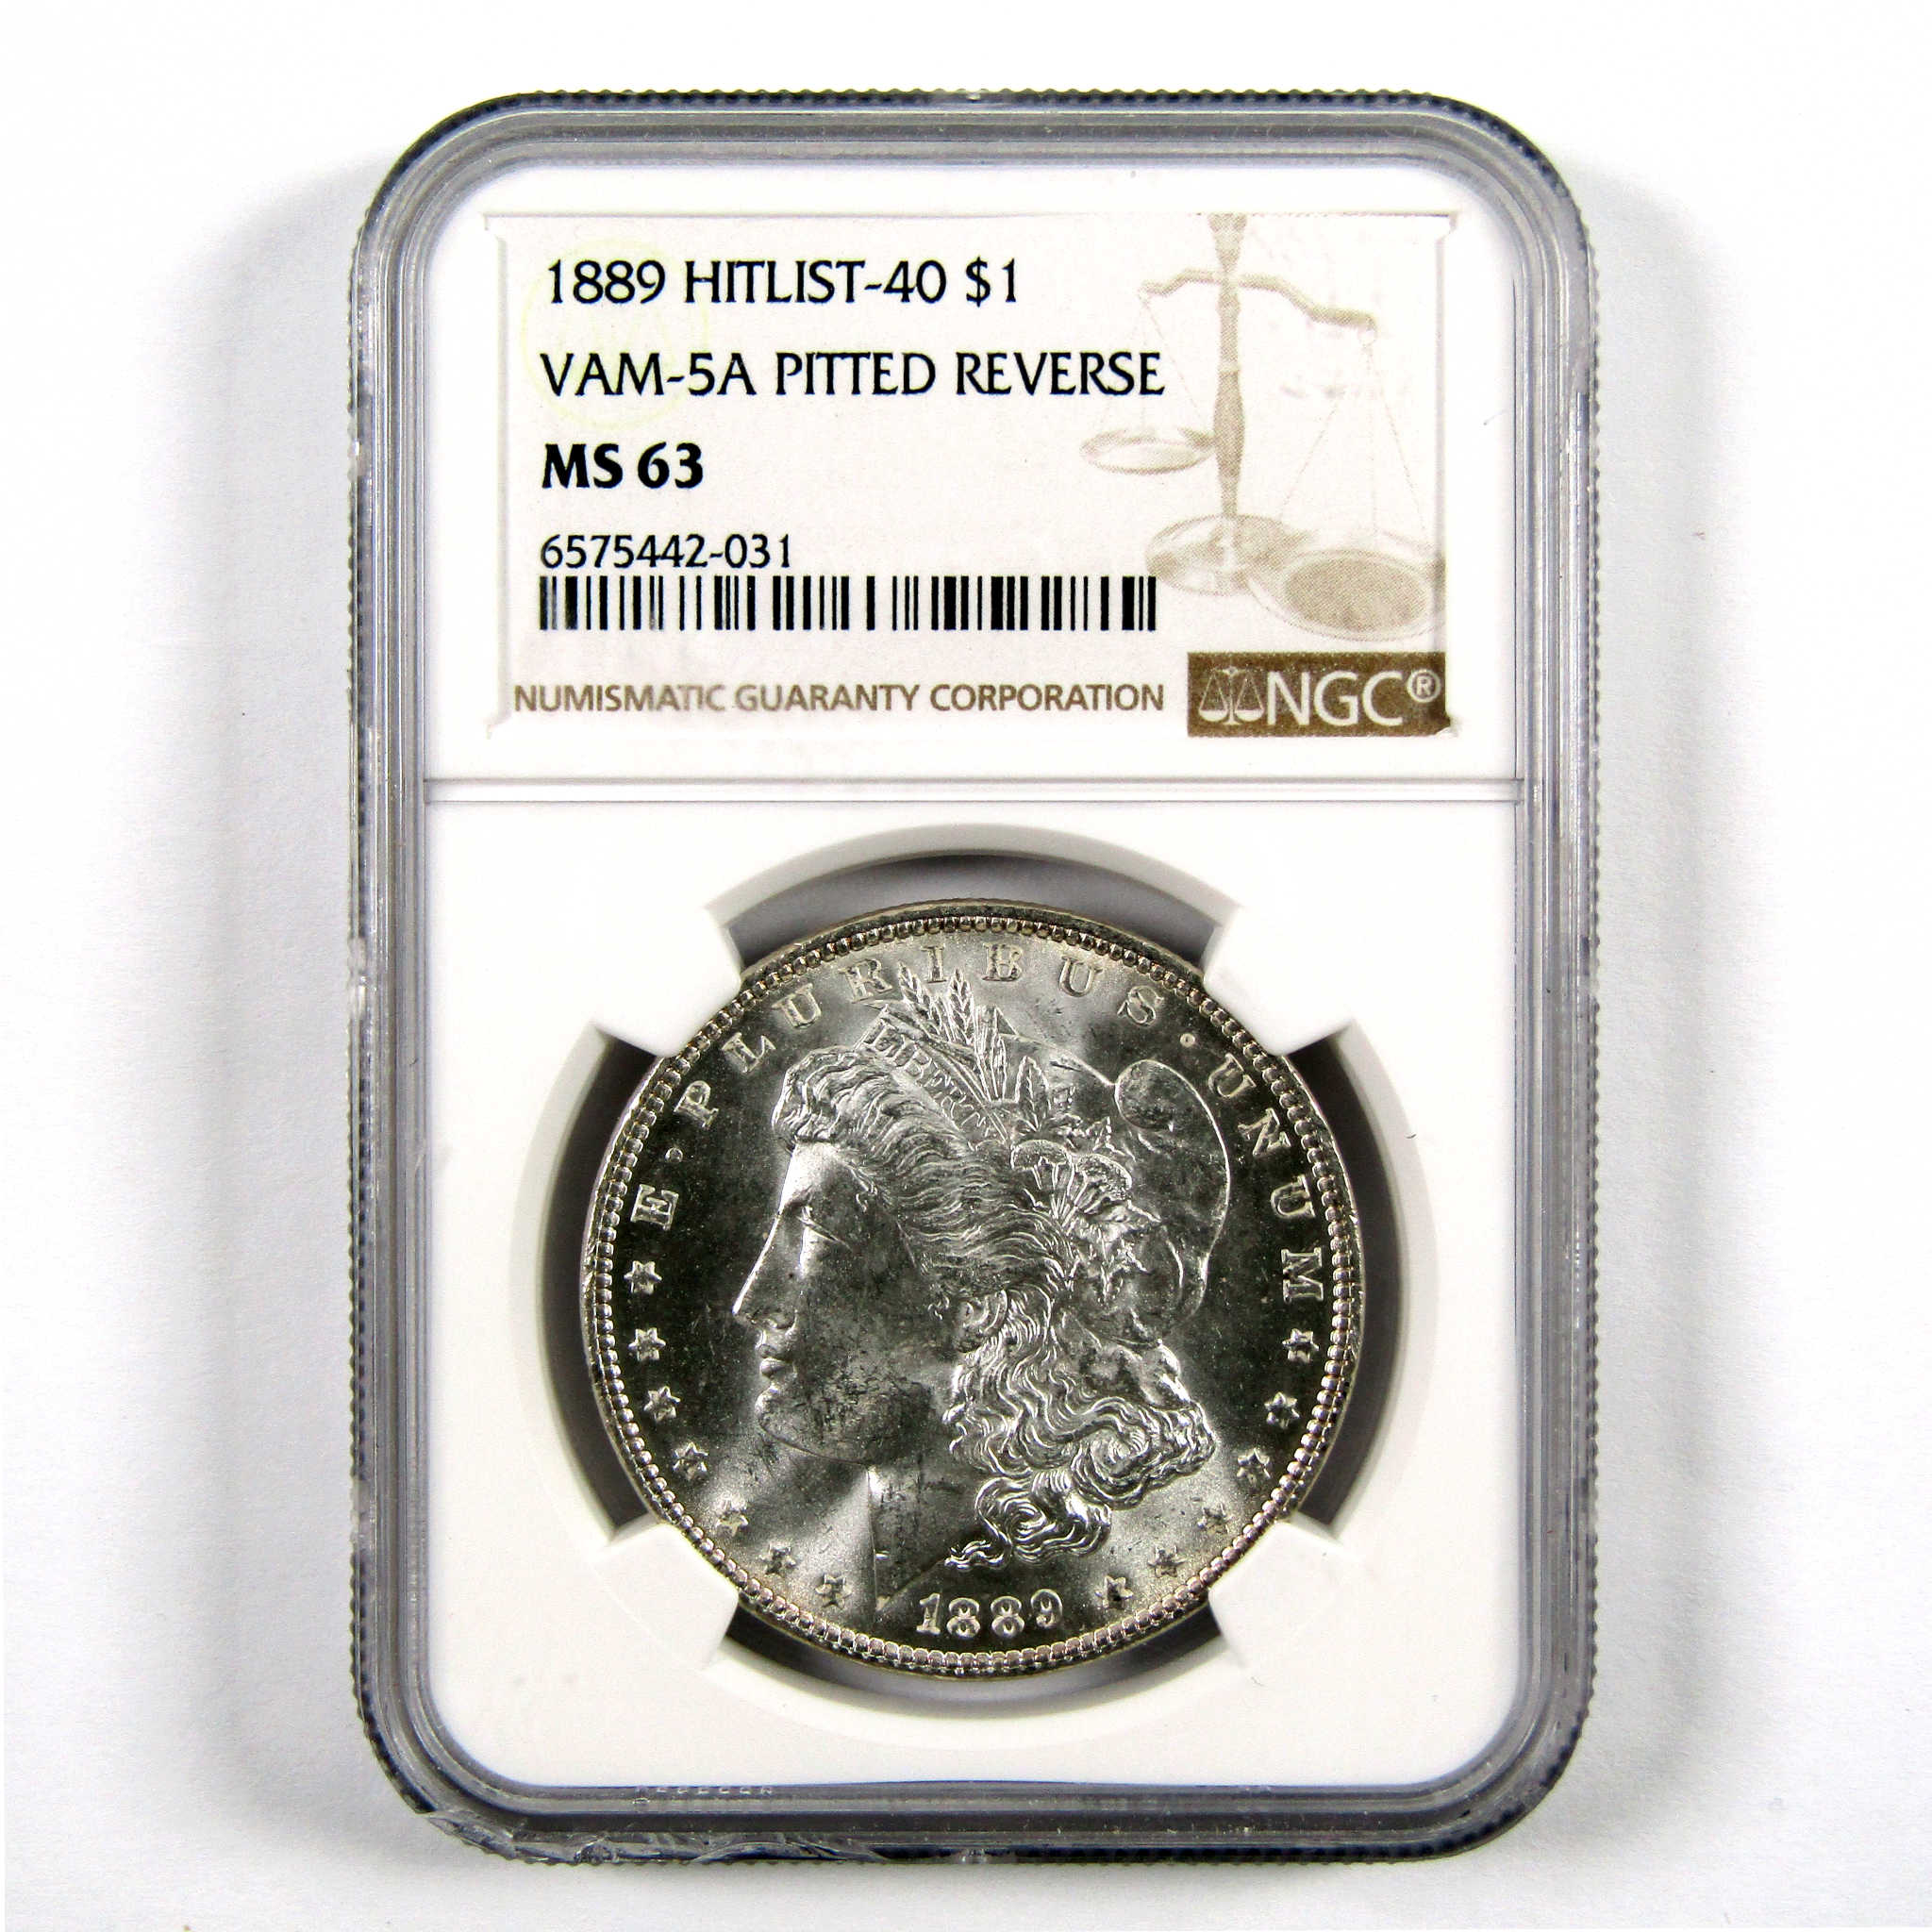 1889 Hitlist-40 VAM-5A Pitted Rev Morgan $1 MS63 NGC SKU:I11090 - Morgan coin - Morgan silver dollar - Morgan silver dollar for sale - Profile Coins &amp; Collectibles